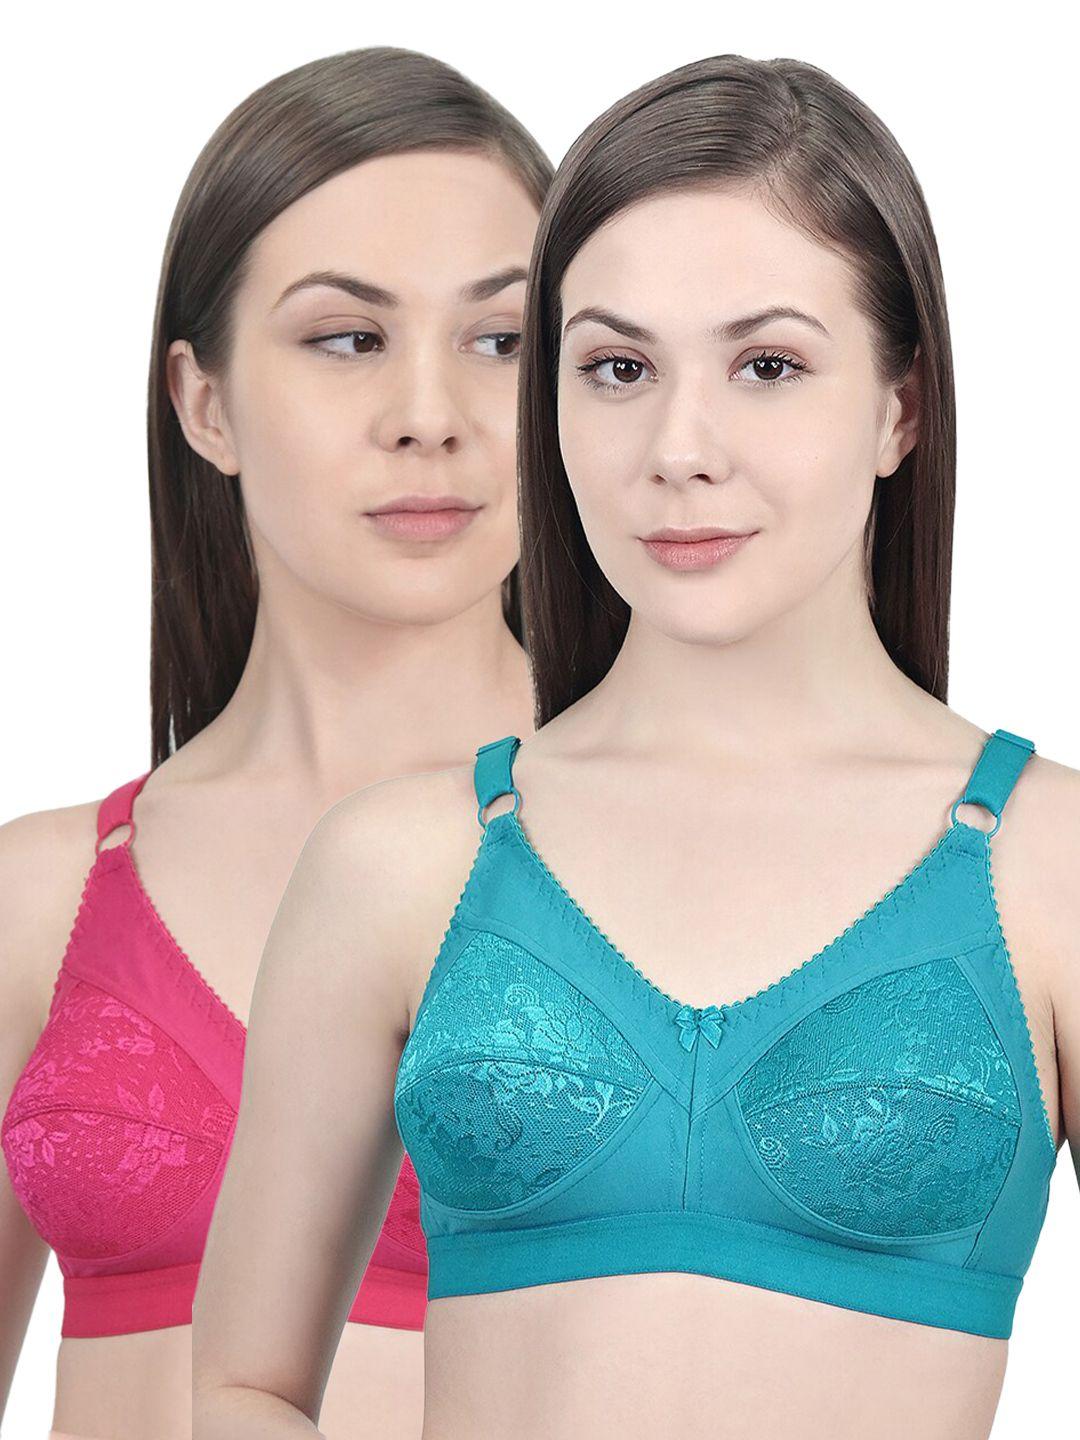 innocence-women-turquoise-blue-&-pink-non-padded-non-wired--everyday-bra-set-of-2